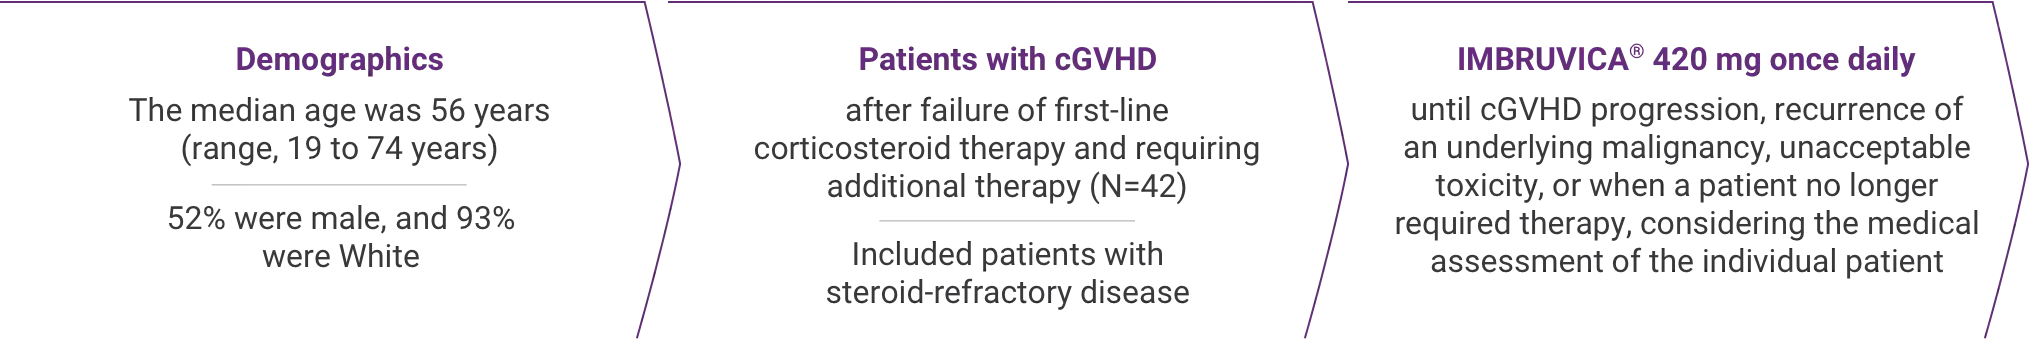 IMBRUVICA®  (ibrutinib) clinical trial study design for patients with previously treated cGVHD